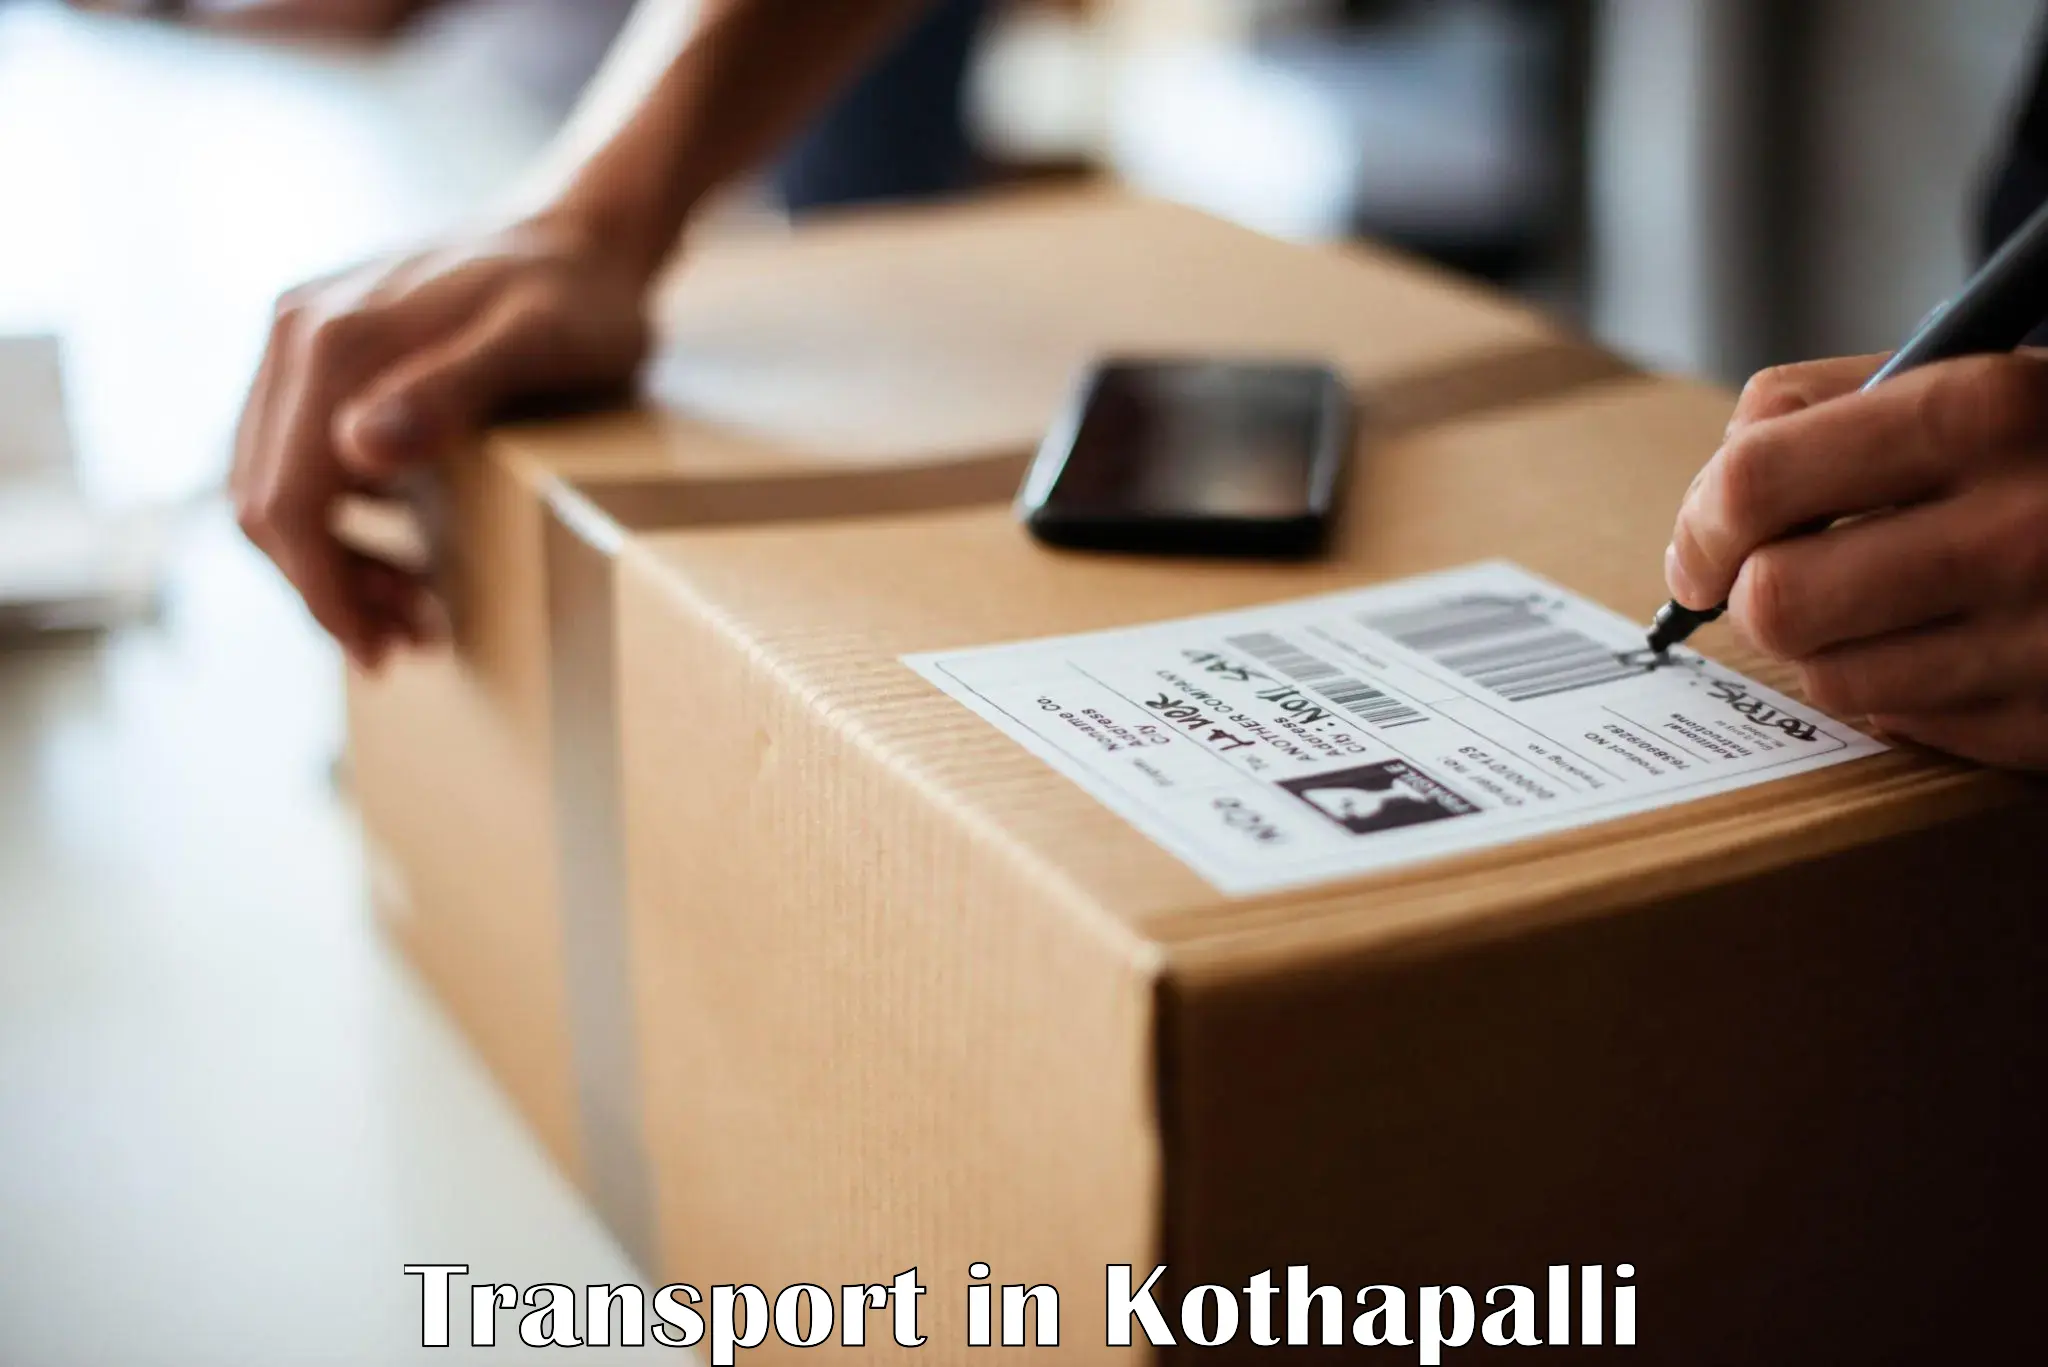 Cargo transport services in Kothapalli